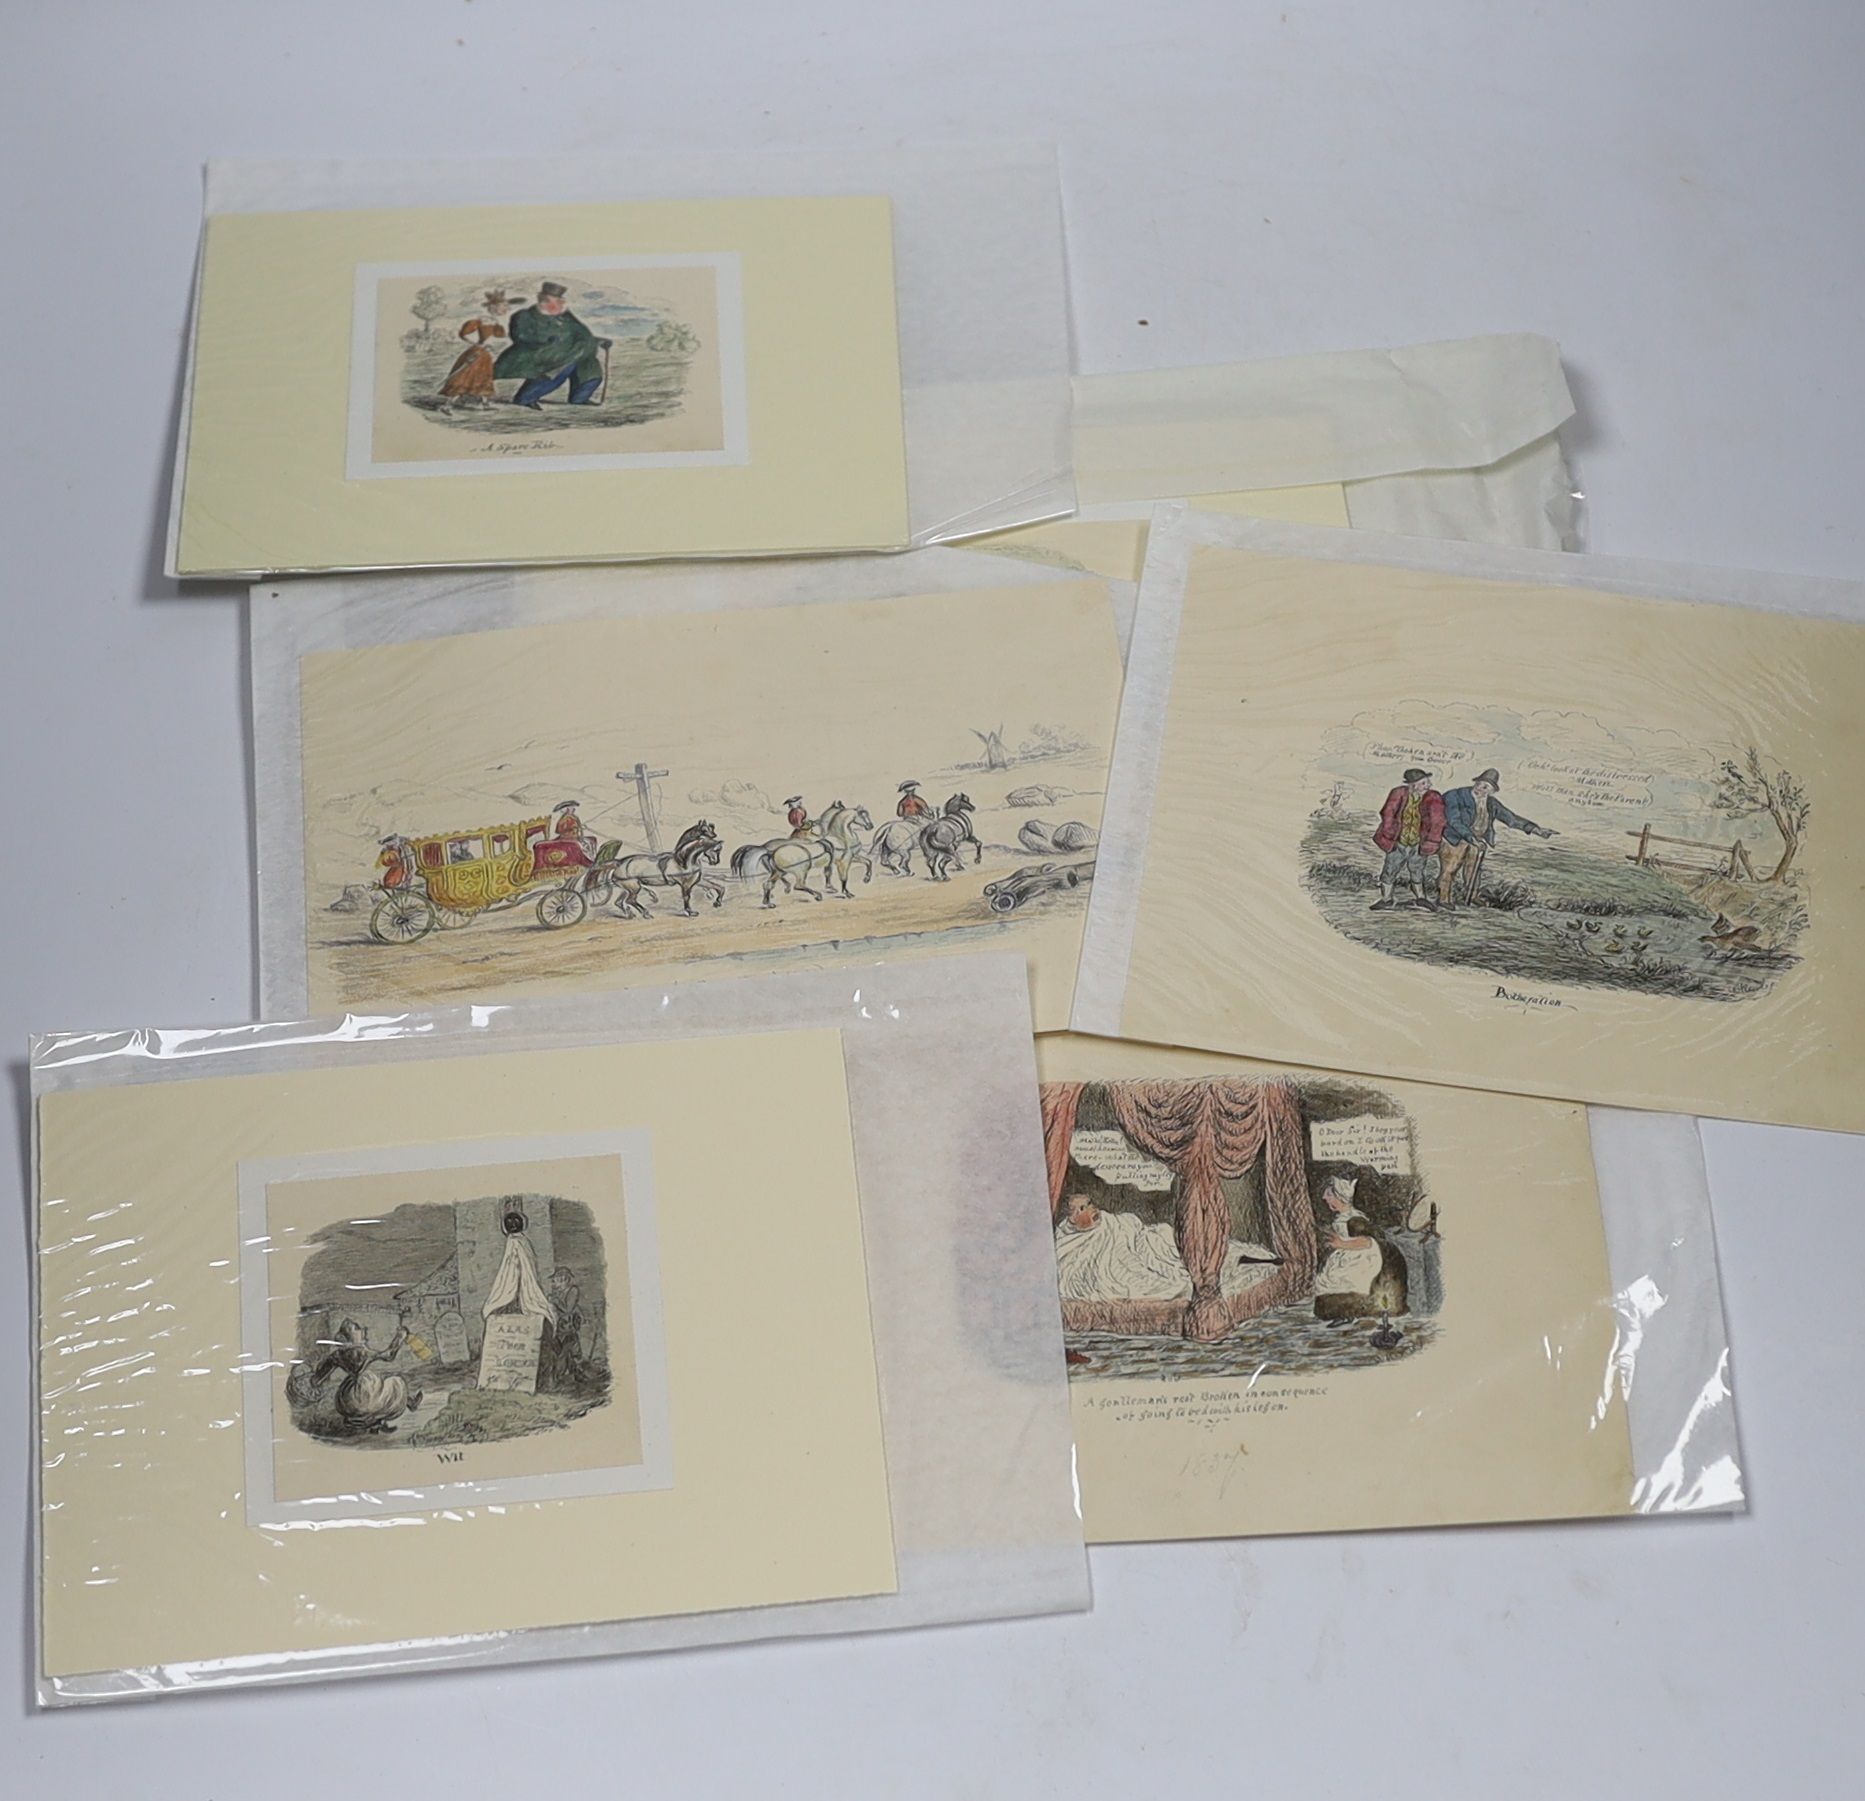 W. Kewley, thirteen pen & ink sketches on paper/card, humorous caricatures including ‘The Better Half’, ‘A Drop of Comfort’ and ‘September Cockney Sportsmen, some signed, unframed, largest 17.5 x 21.5cm